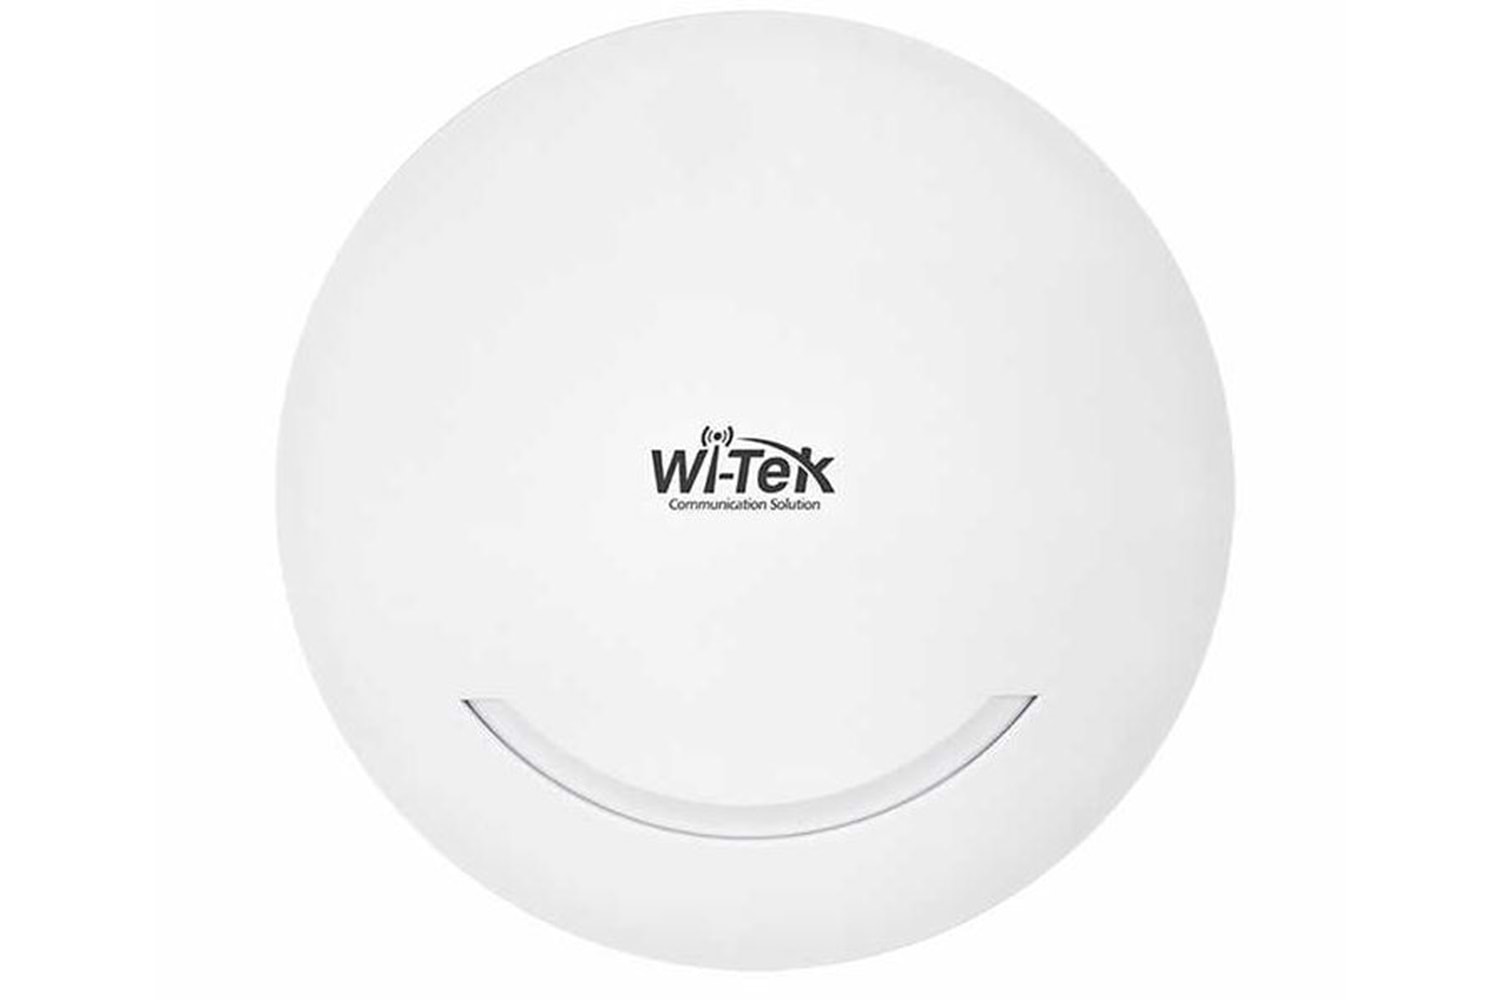 WI-TEK WI-AP210-Lite 2.4G 300Mbps Indoor Wireless Access Point